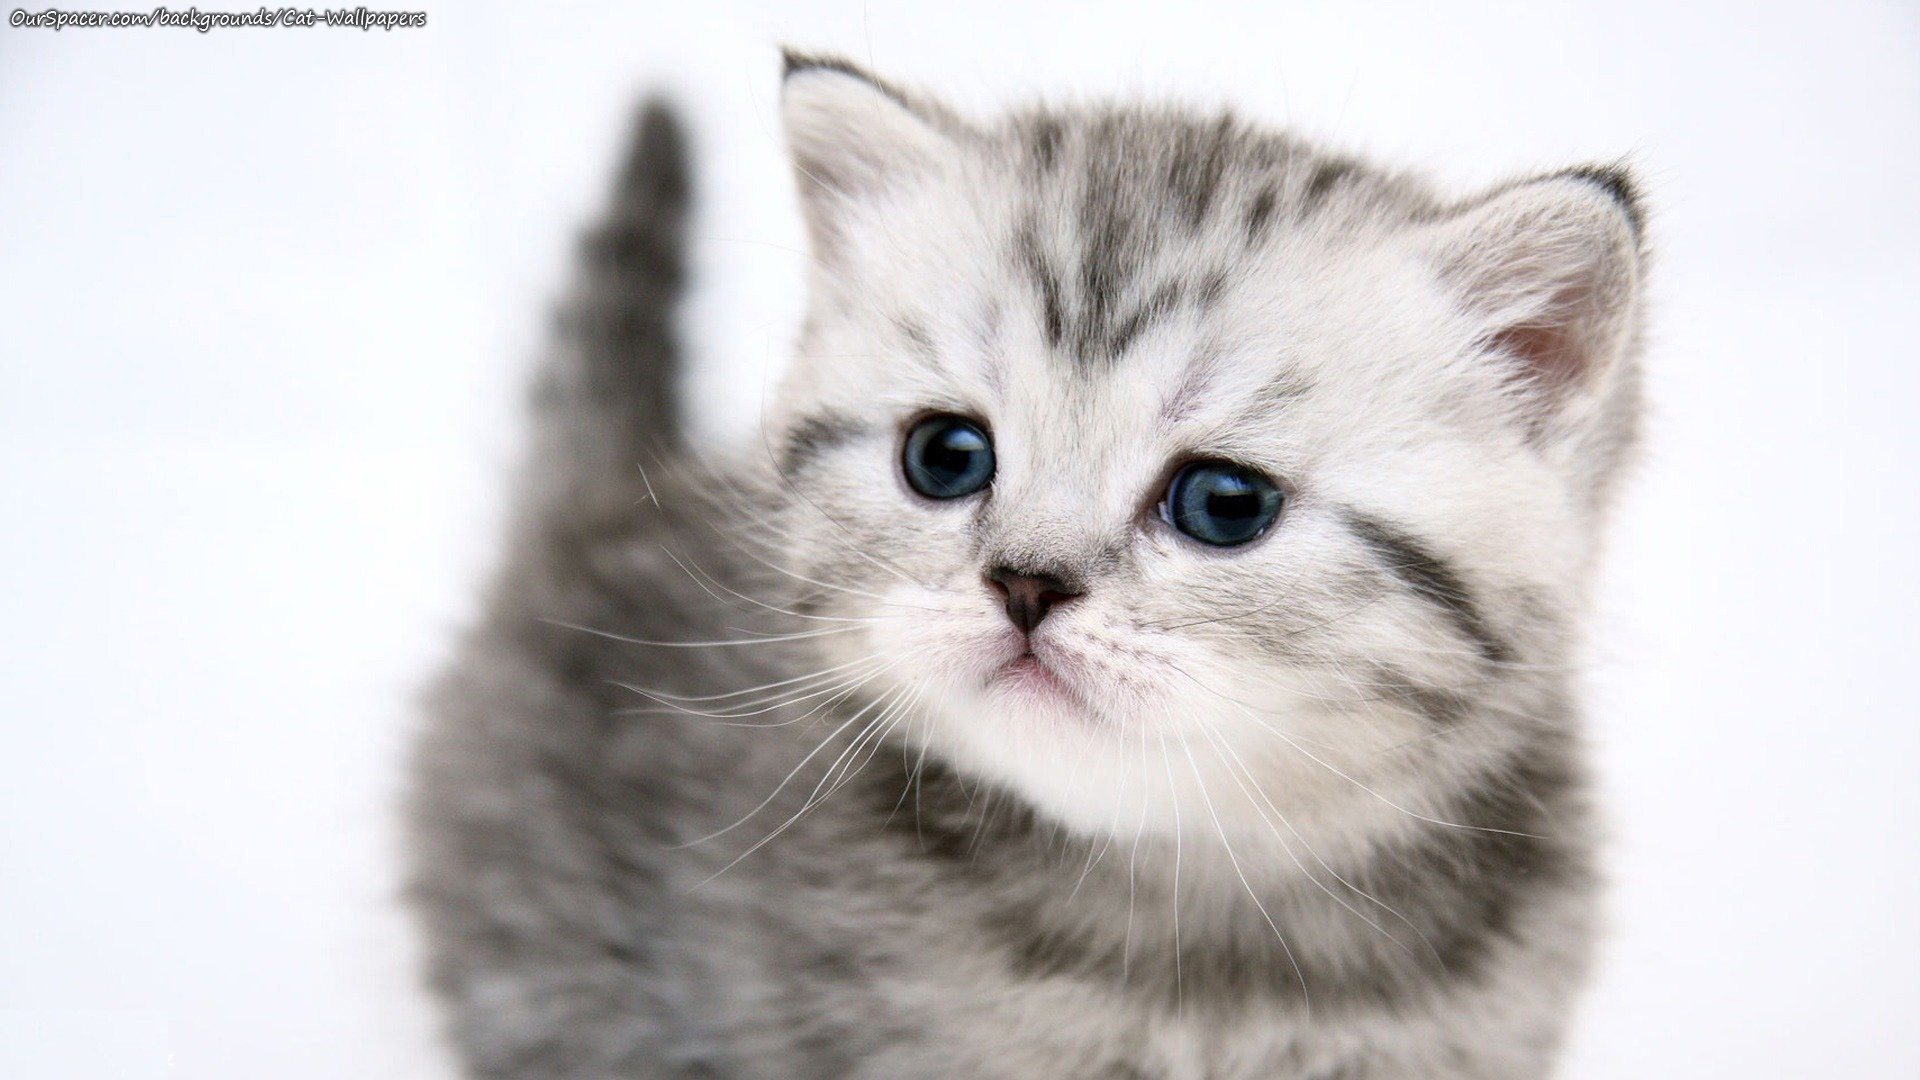 1920x1080 Black and white kitten wallpapers for myspace, twitter, and hi5 backgrounds